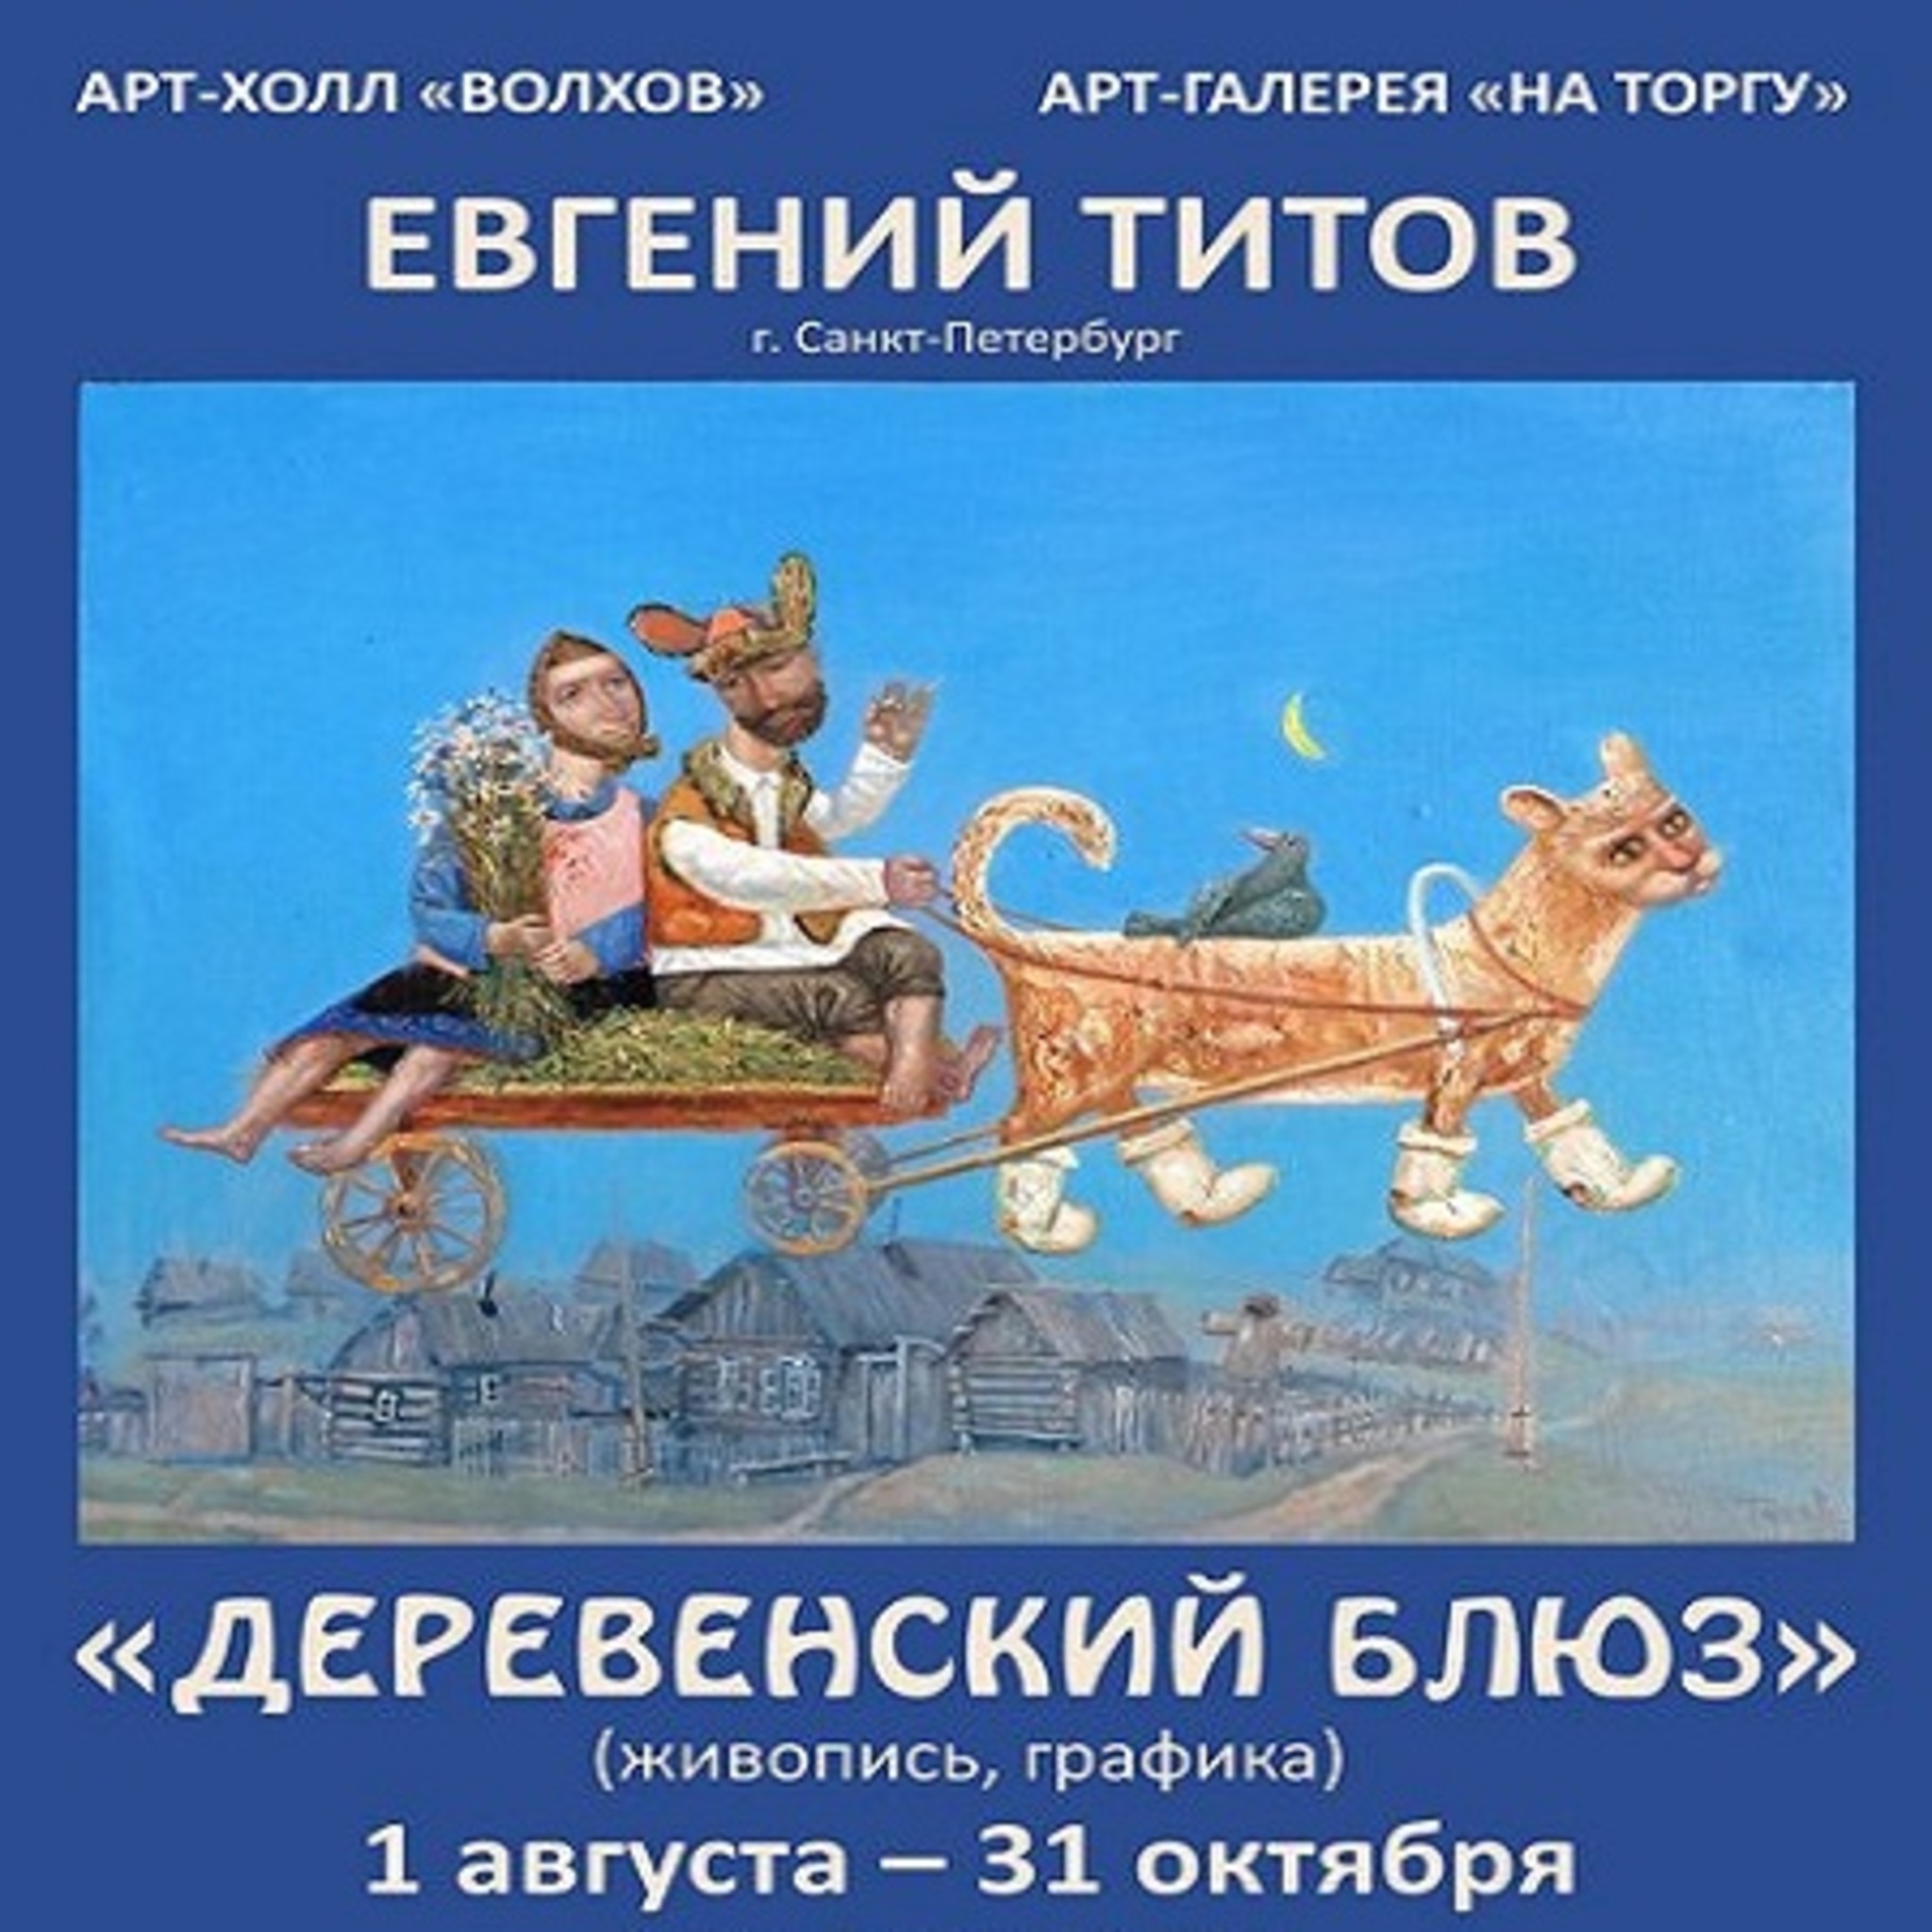 Exhibition of paintings and graphics Titov Country Blues